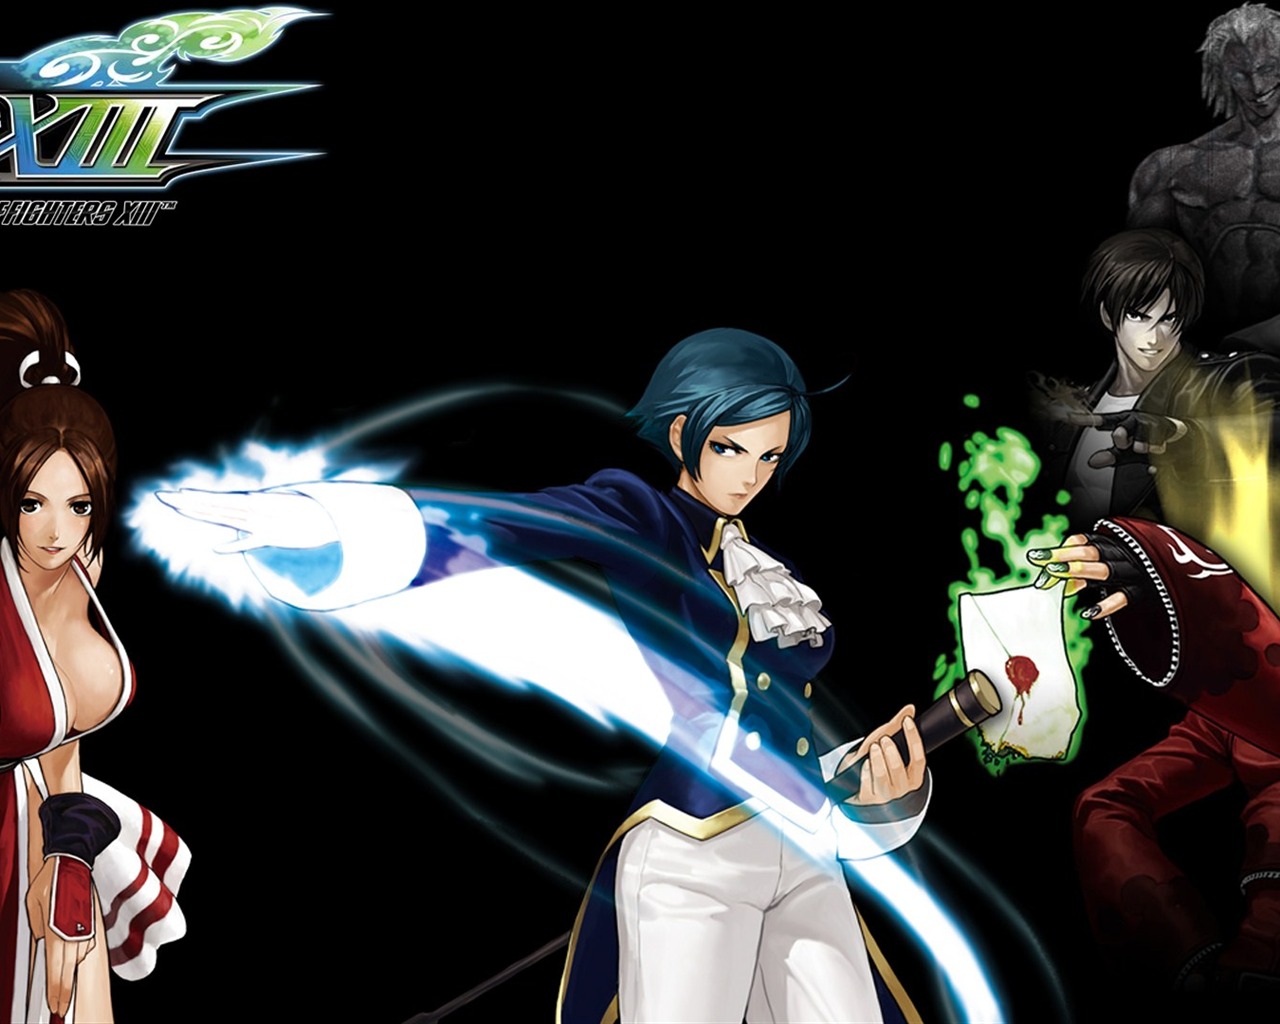 The King of Fighters XIII wallpapers #7 - 1280x1024